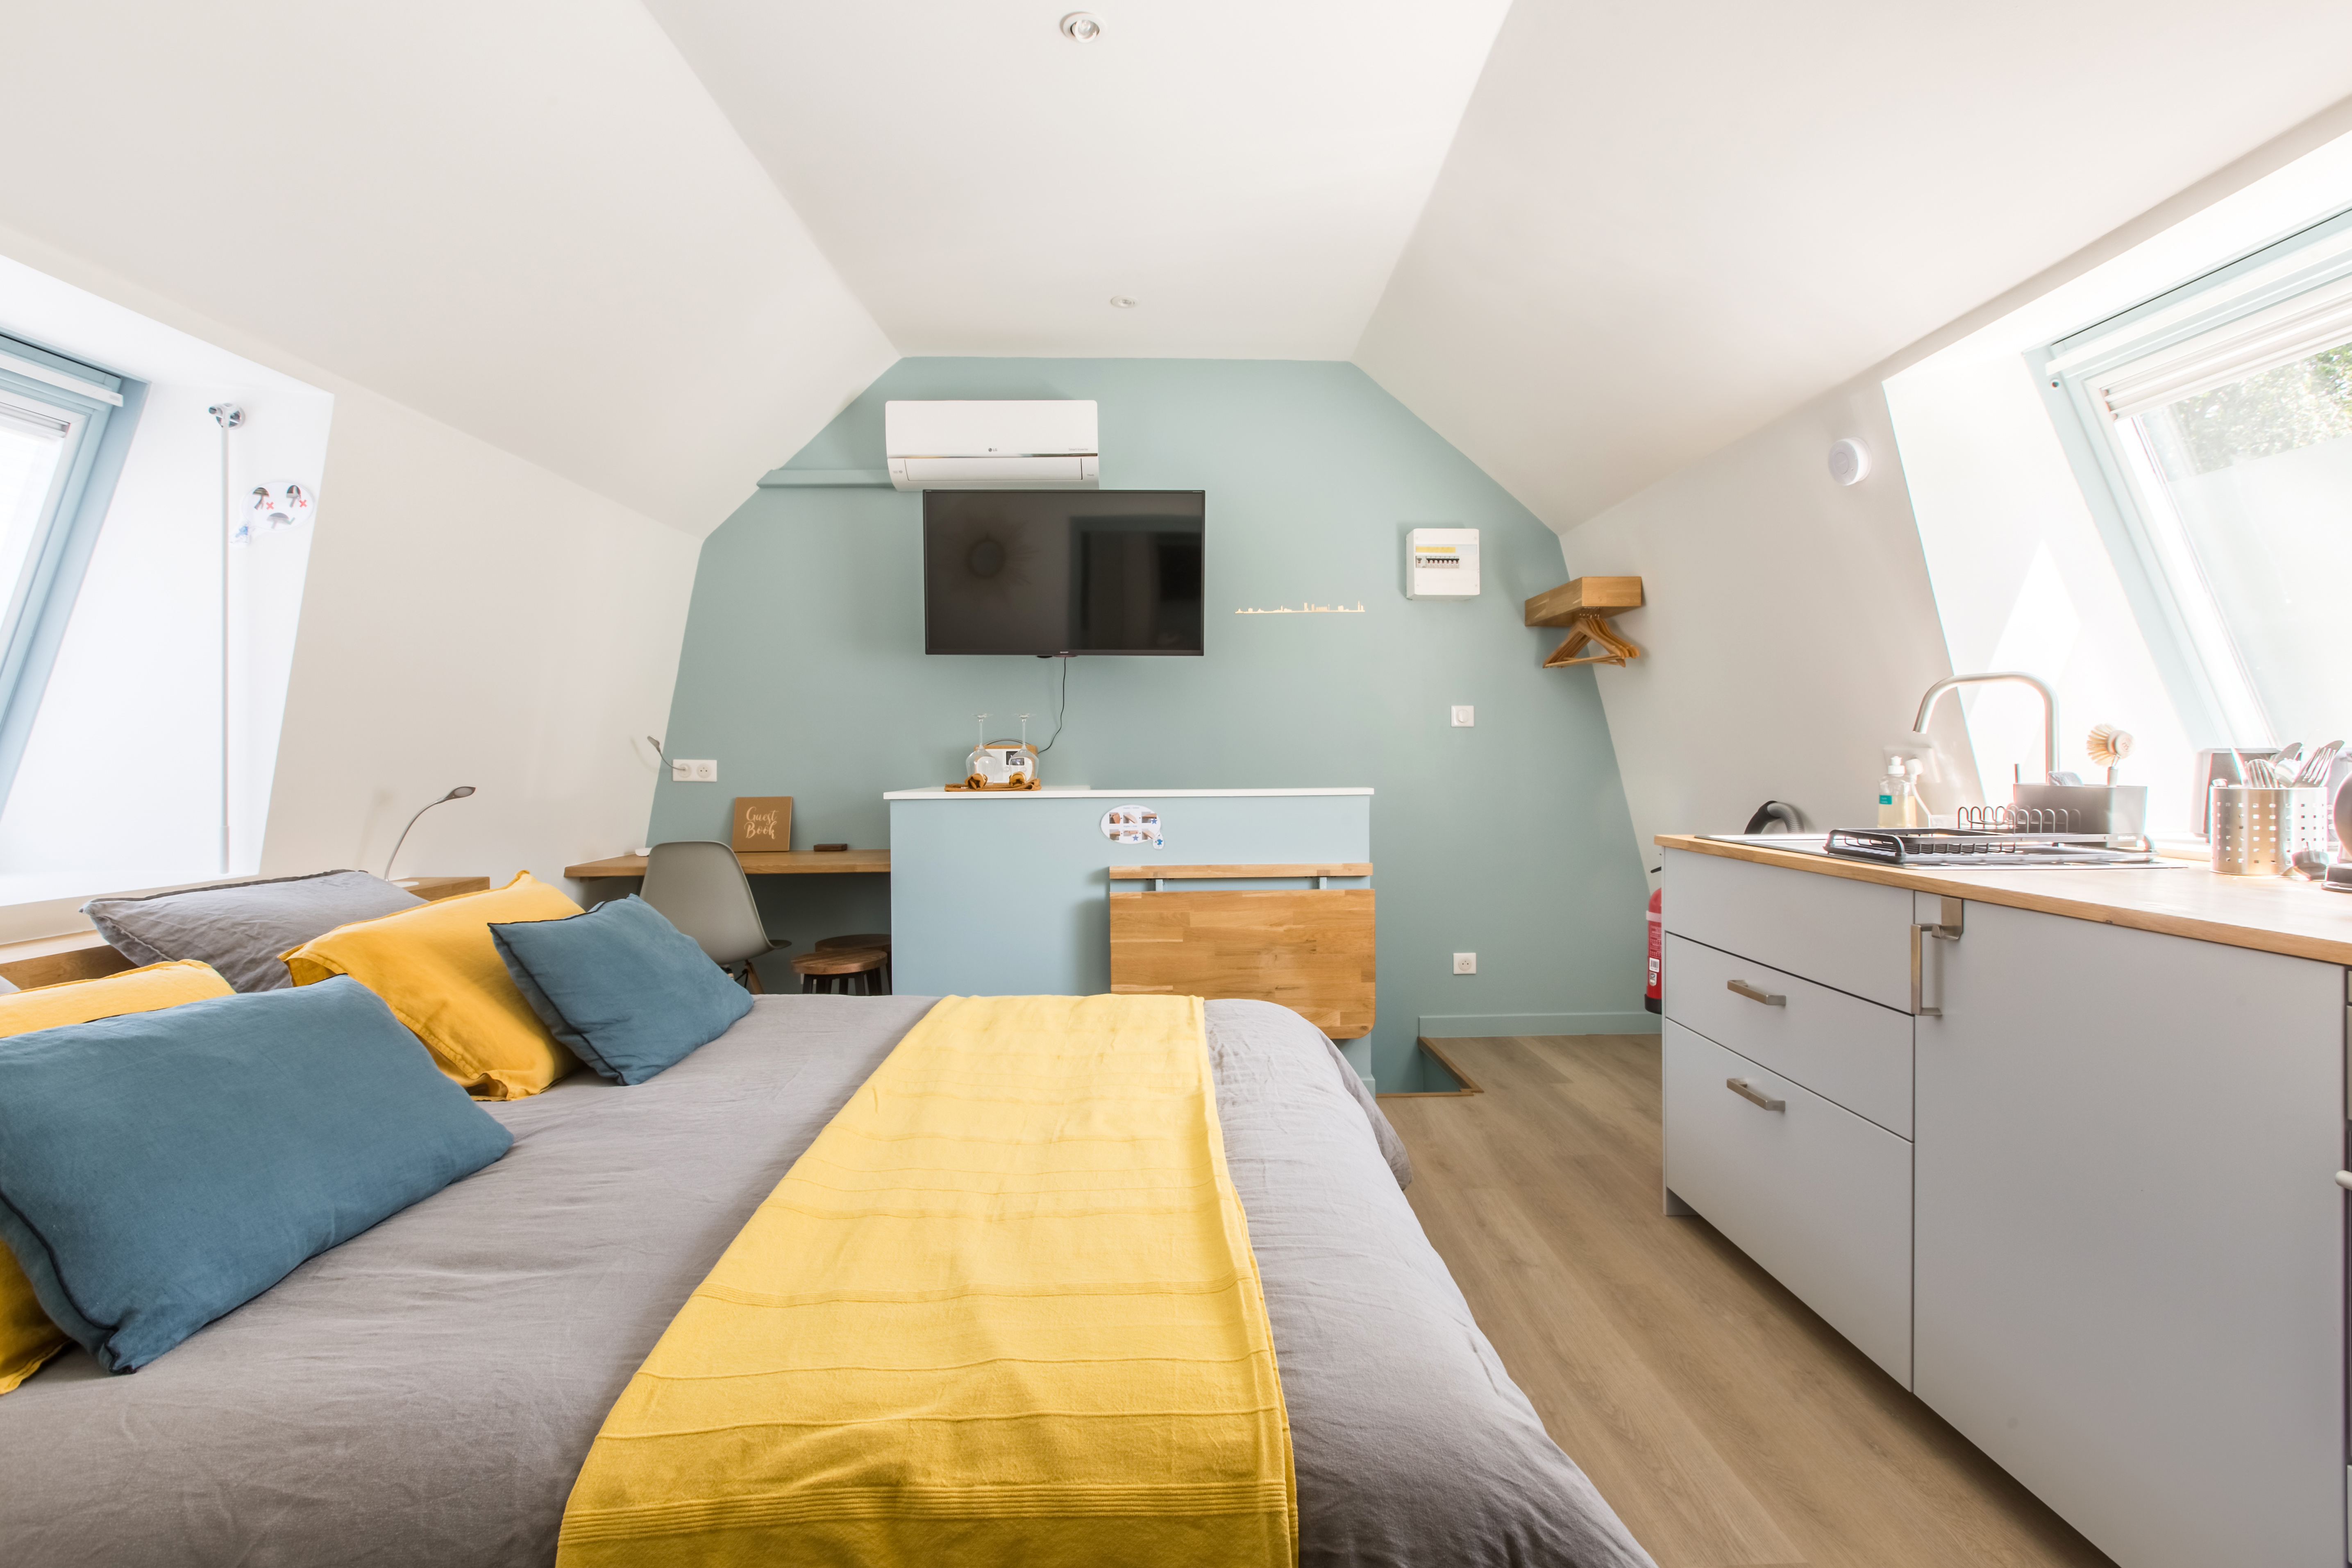 Interior shot of a modern attic studio apartment built under the eaves. Boldly painted aquamarine wall in the background. Bed and kitchenette in the foreground.